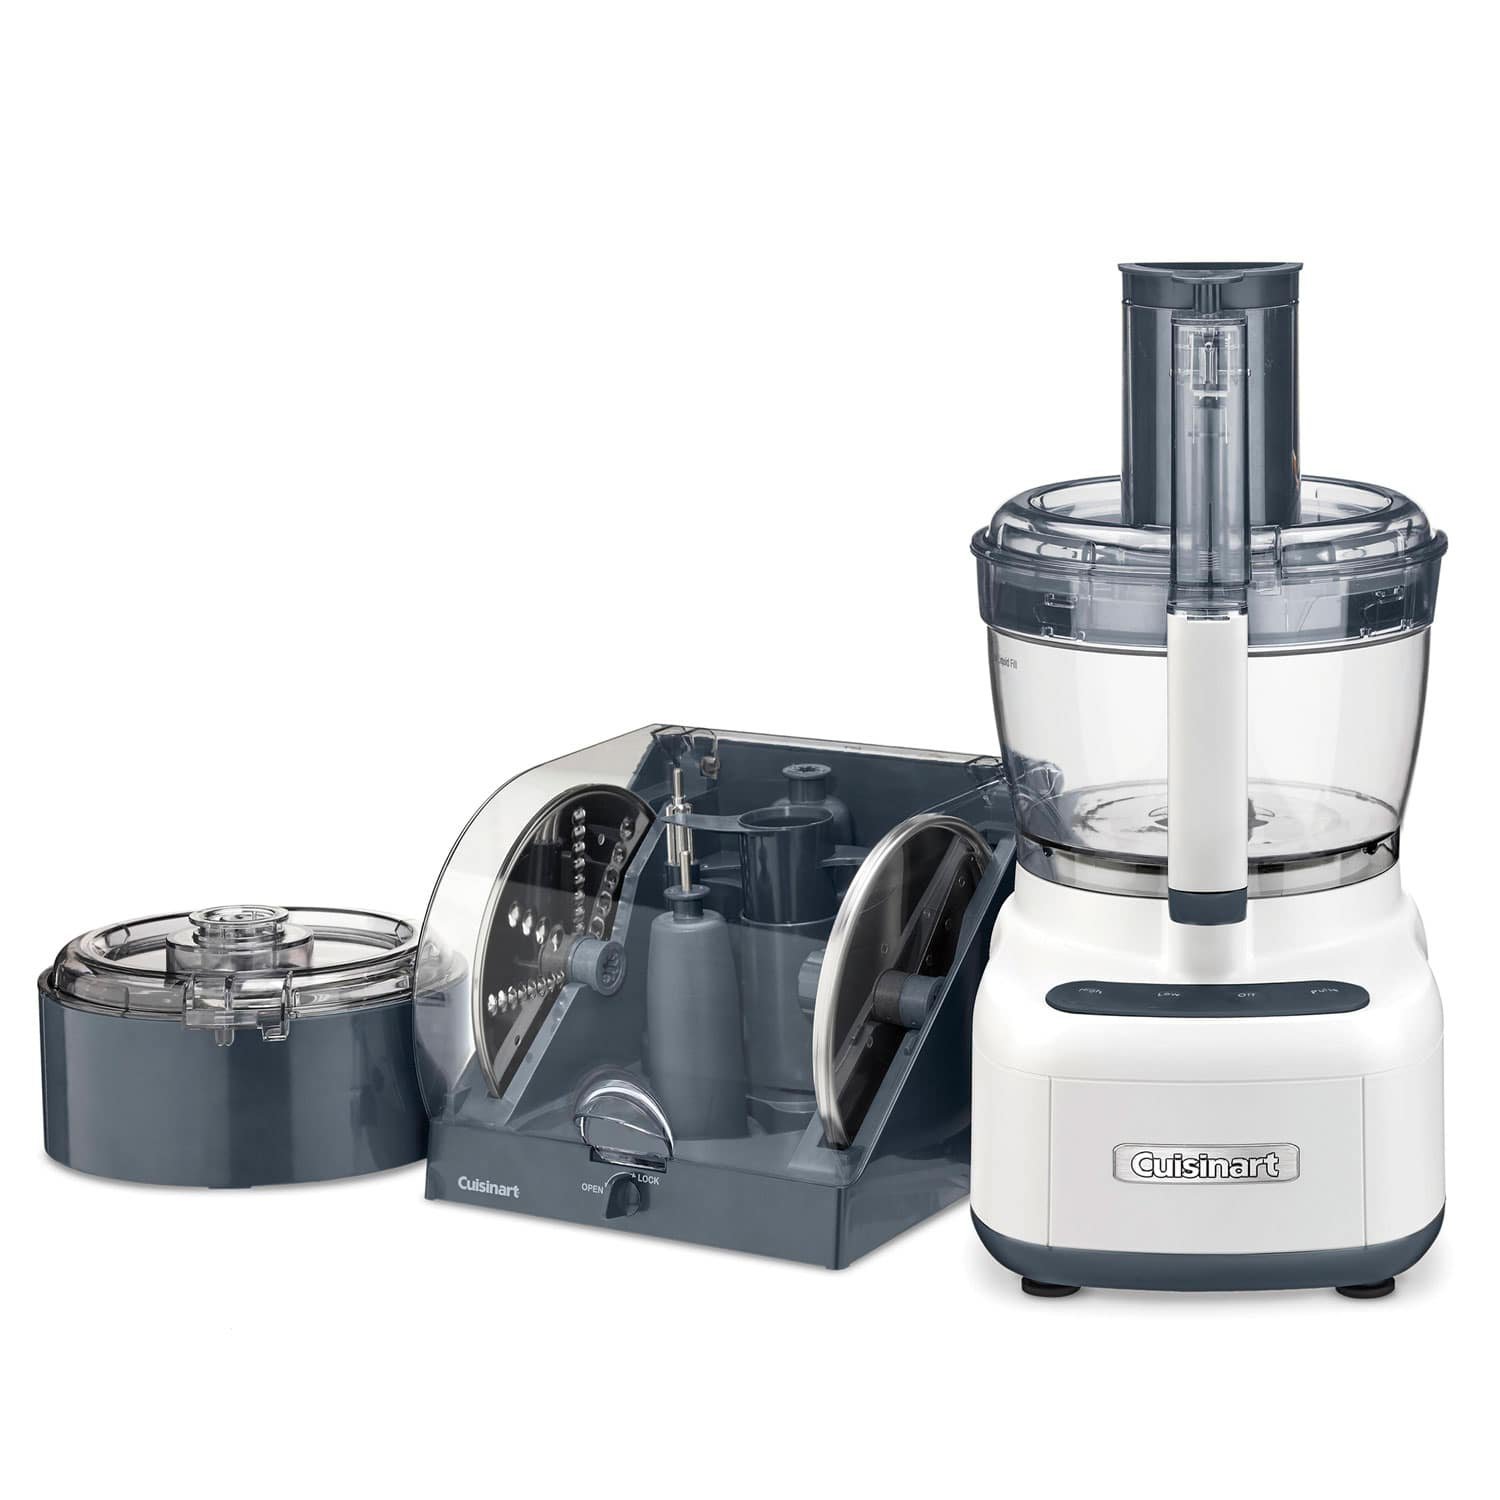 wedding registry ideas Cuisinart Elemental 13-cup food processor with spiralizer and dicer from Williams Sonoma